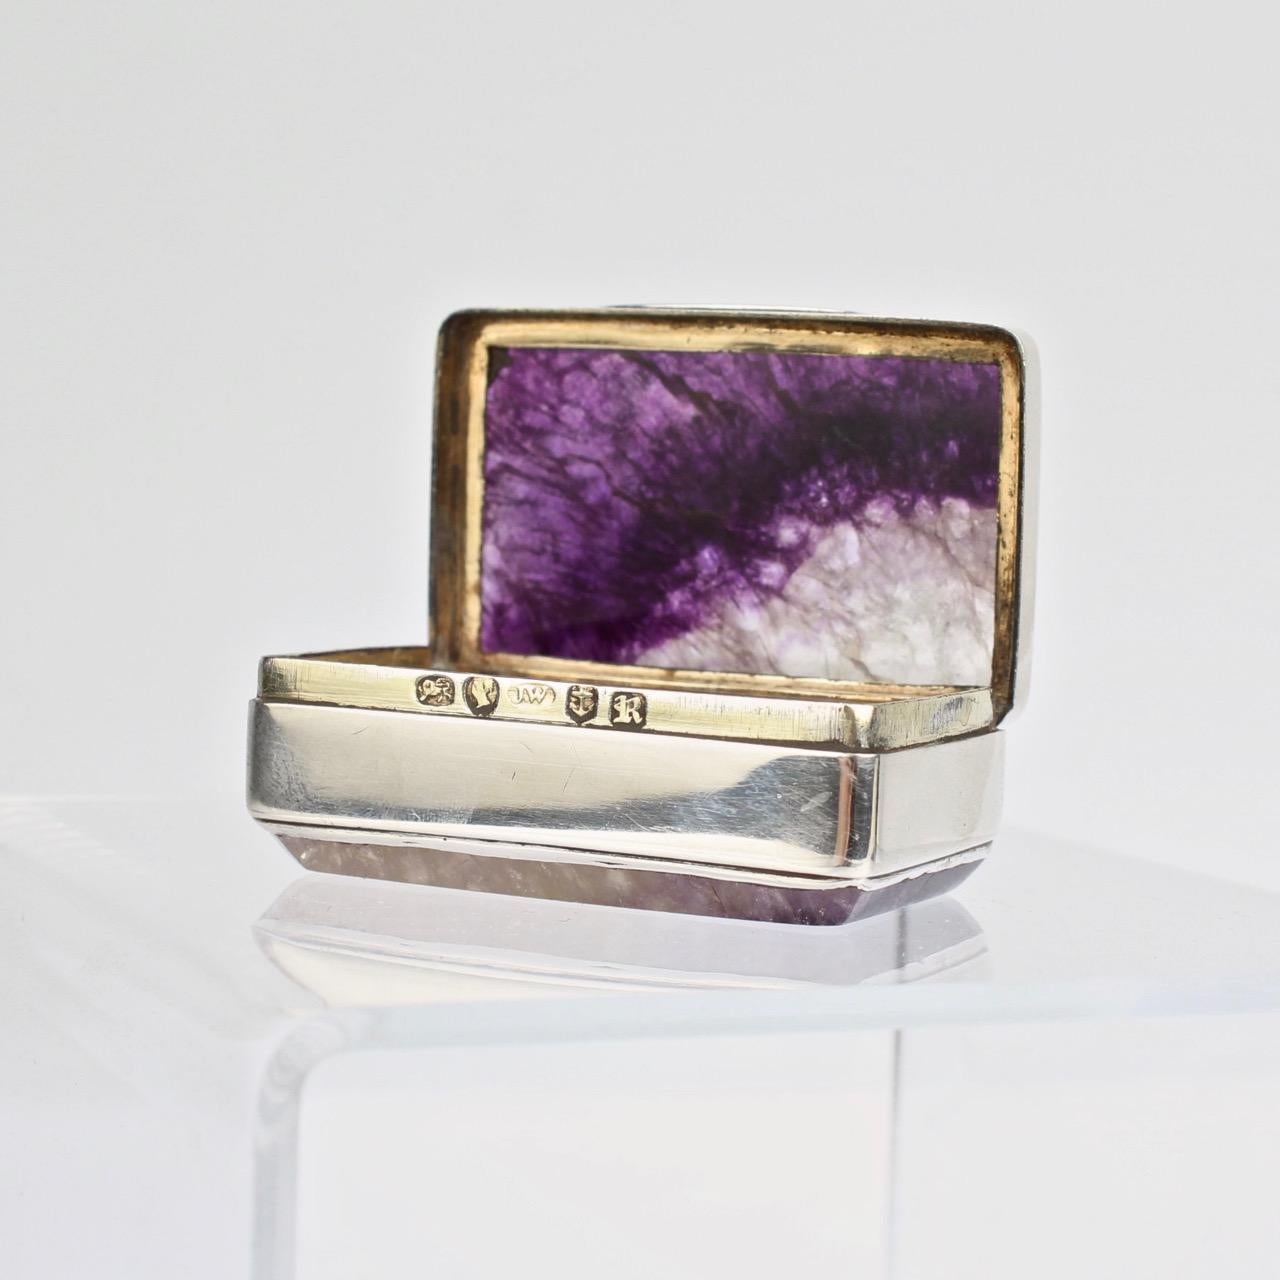 Women's or Men's Antique English Sterling Silver and Derbyshire Spar or Bluejohn Snuff Box